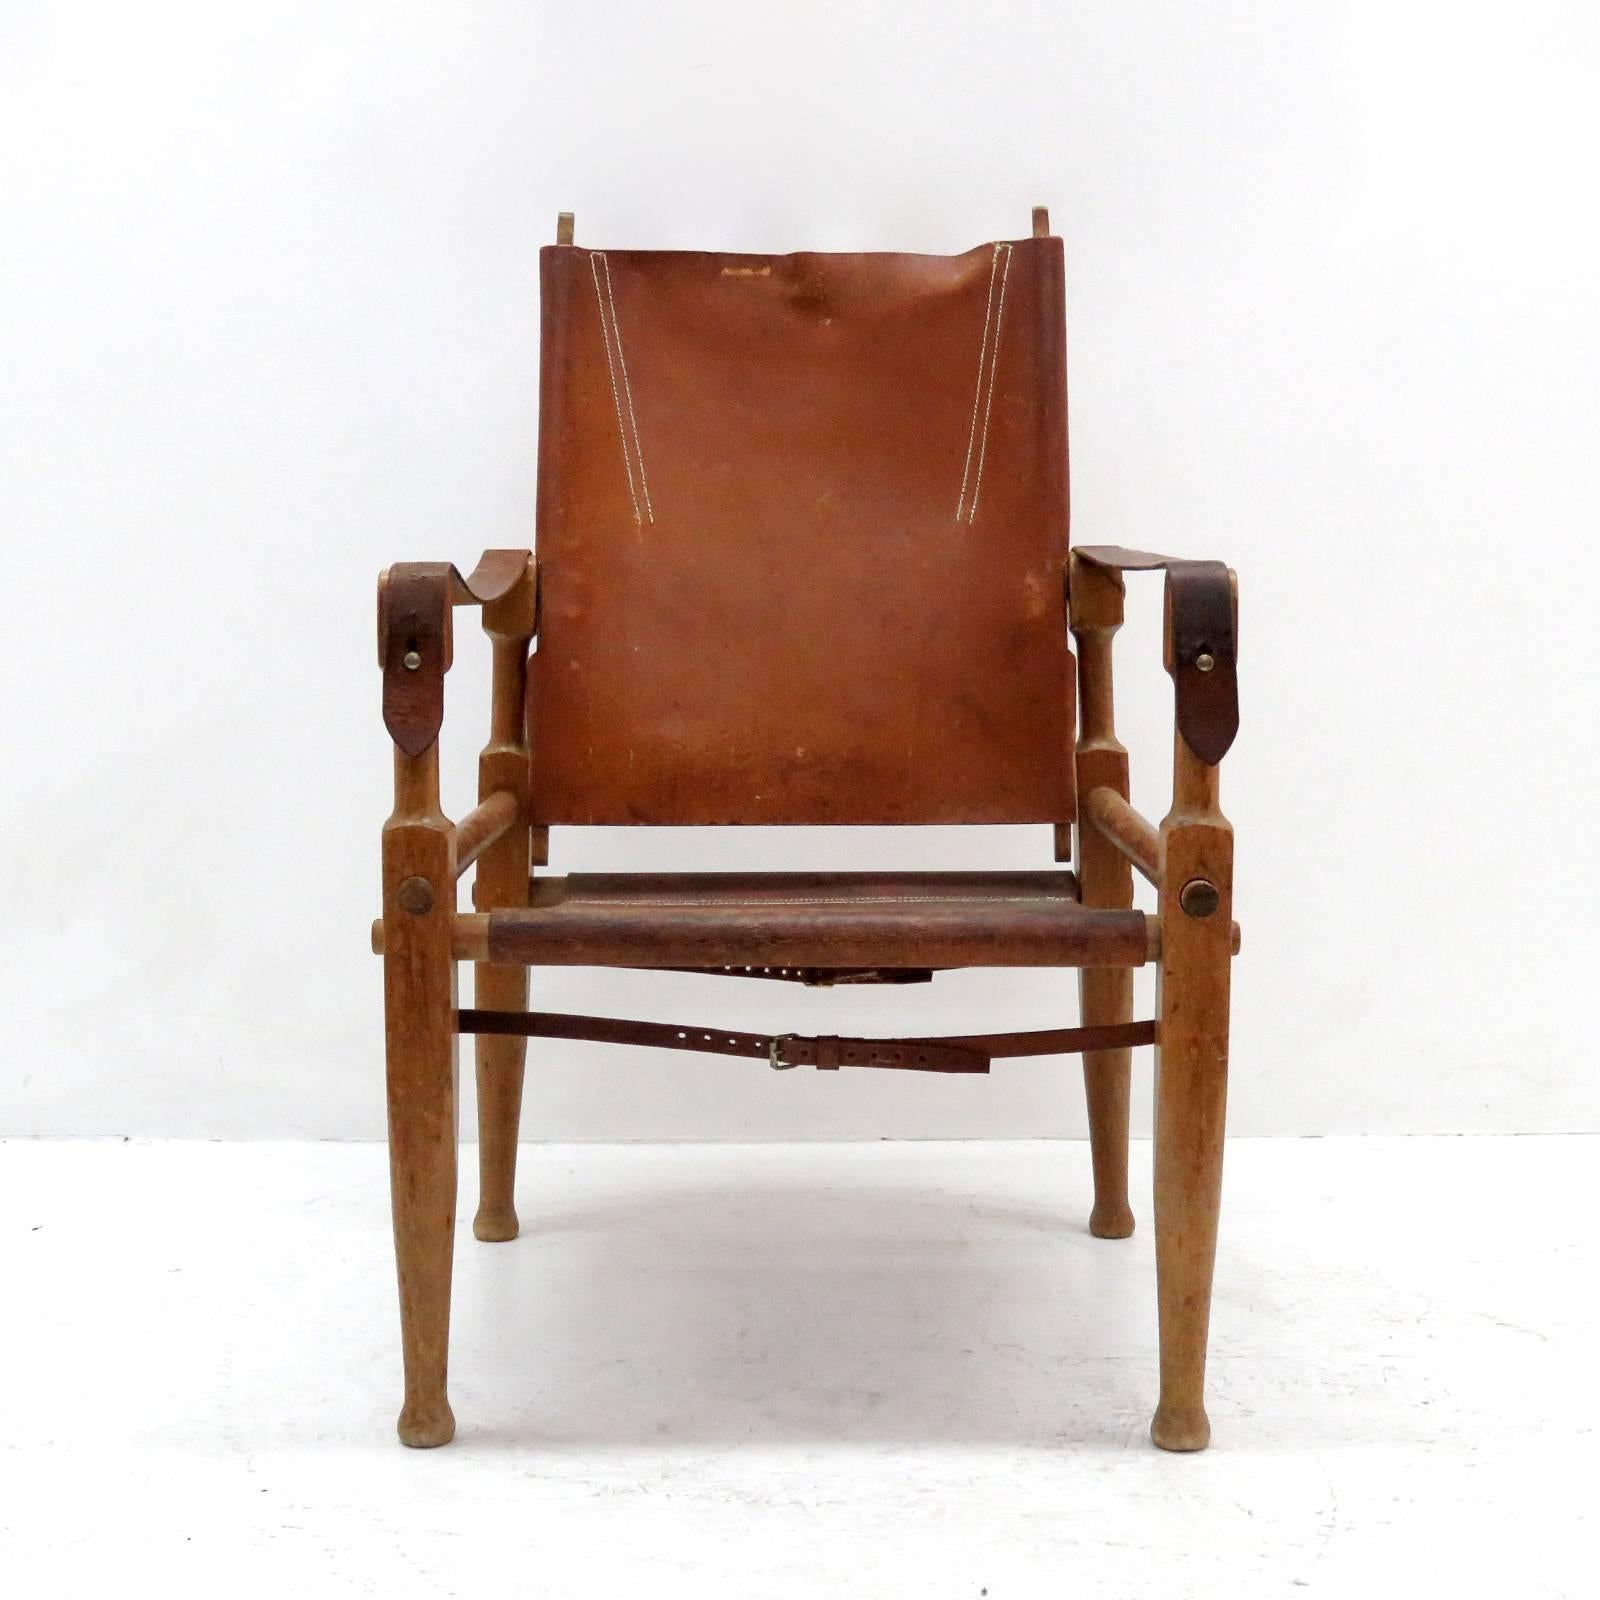 wonderful safari chair, designed by Wilhelm Kienzle in 1928 for Wohnbedarf and manufactured in the early 1950s in Switzerland, with frame made of solid beech, covering in original brown leather, adjustable backrest, can be completely disassembled.